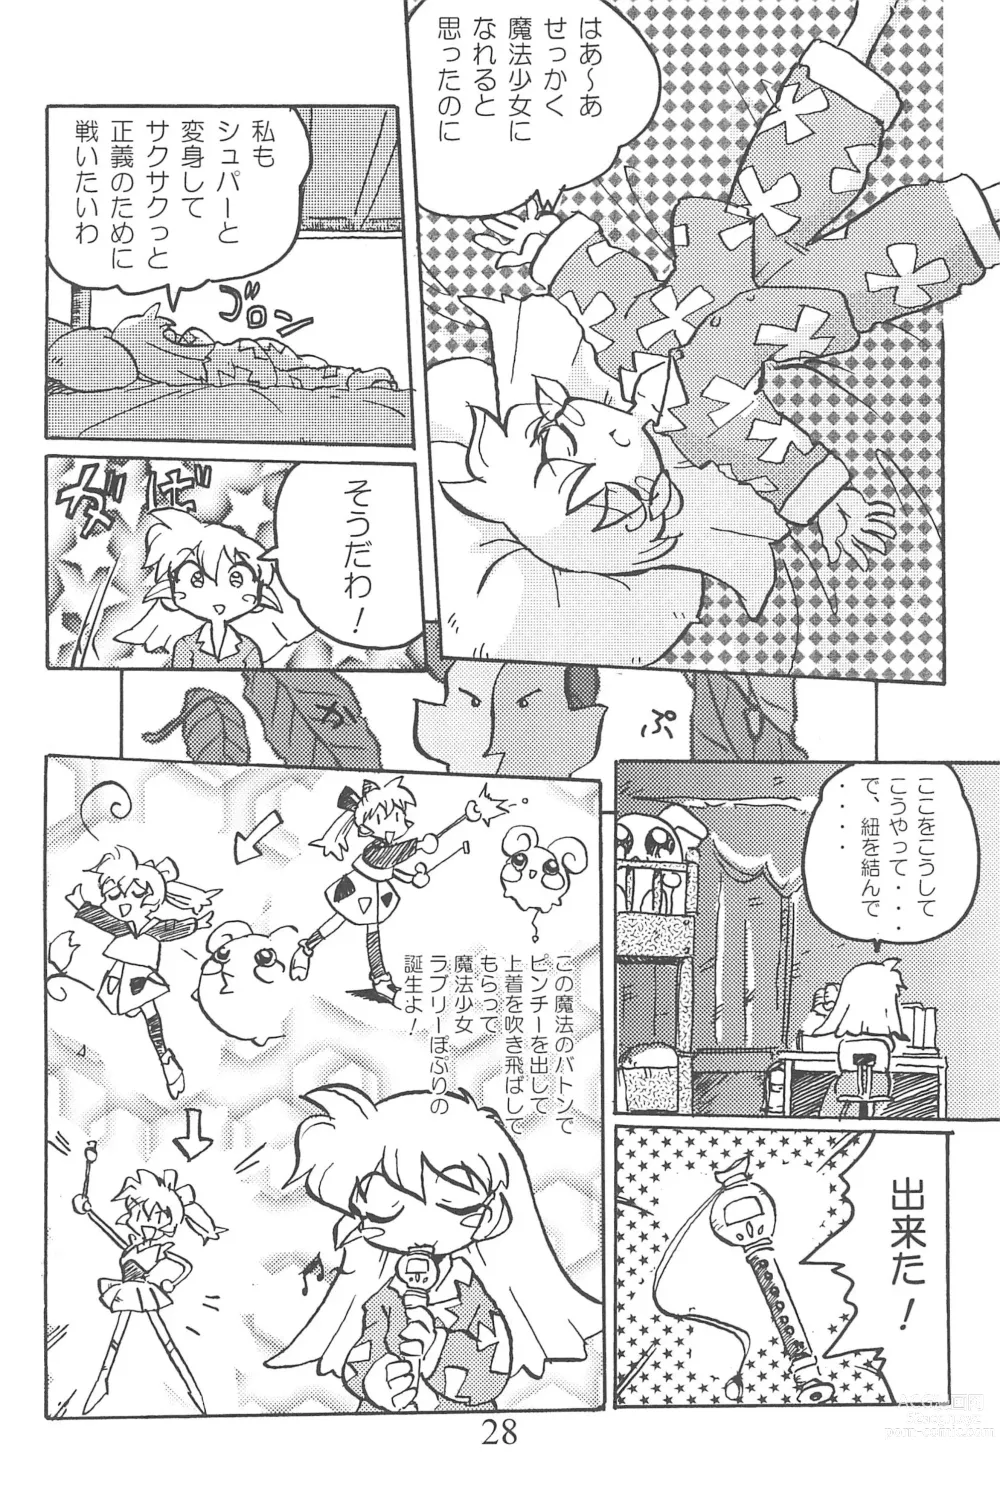 Page 28 of doujinshi Amuse-gueule